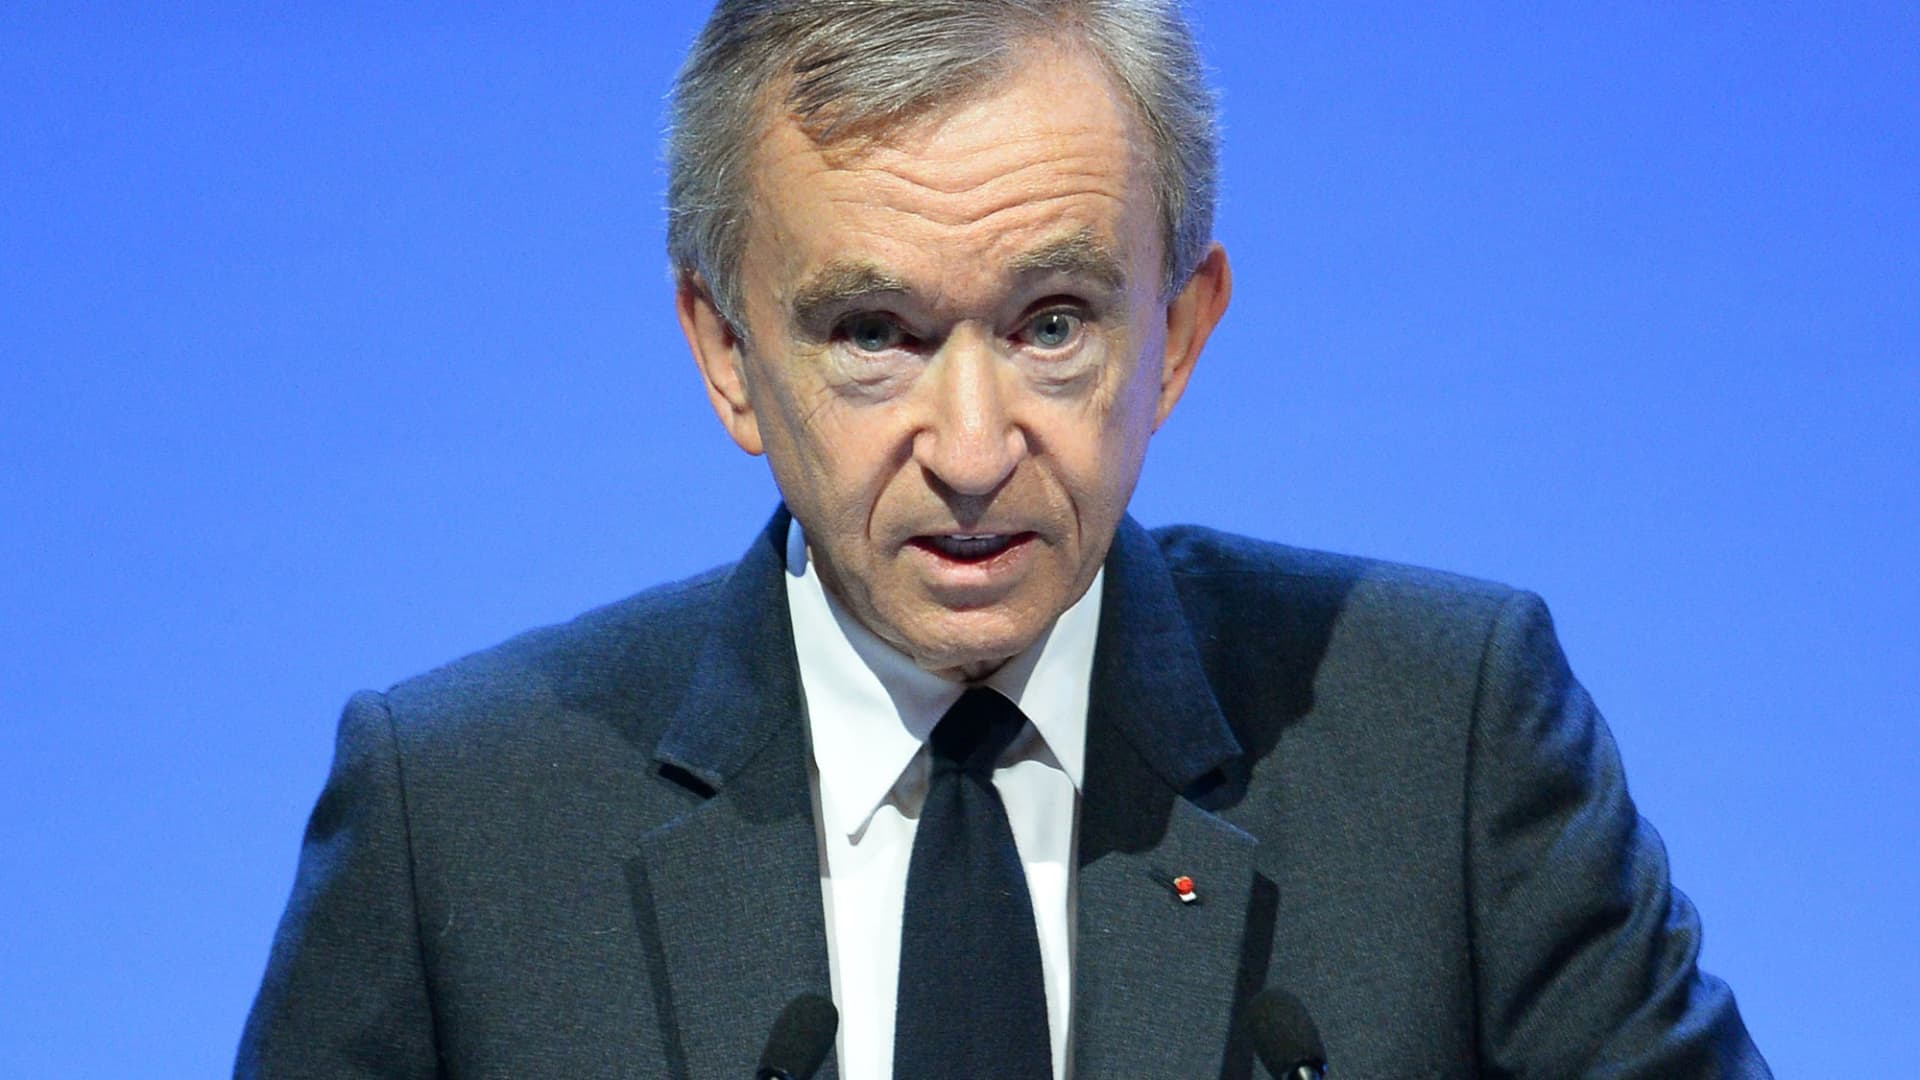 LVMH CEO Arnault says 'we have to be wary of bubbles' with the metaverse